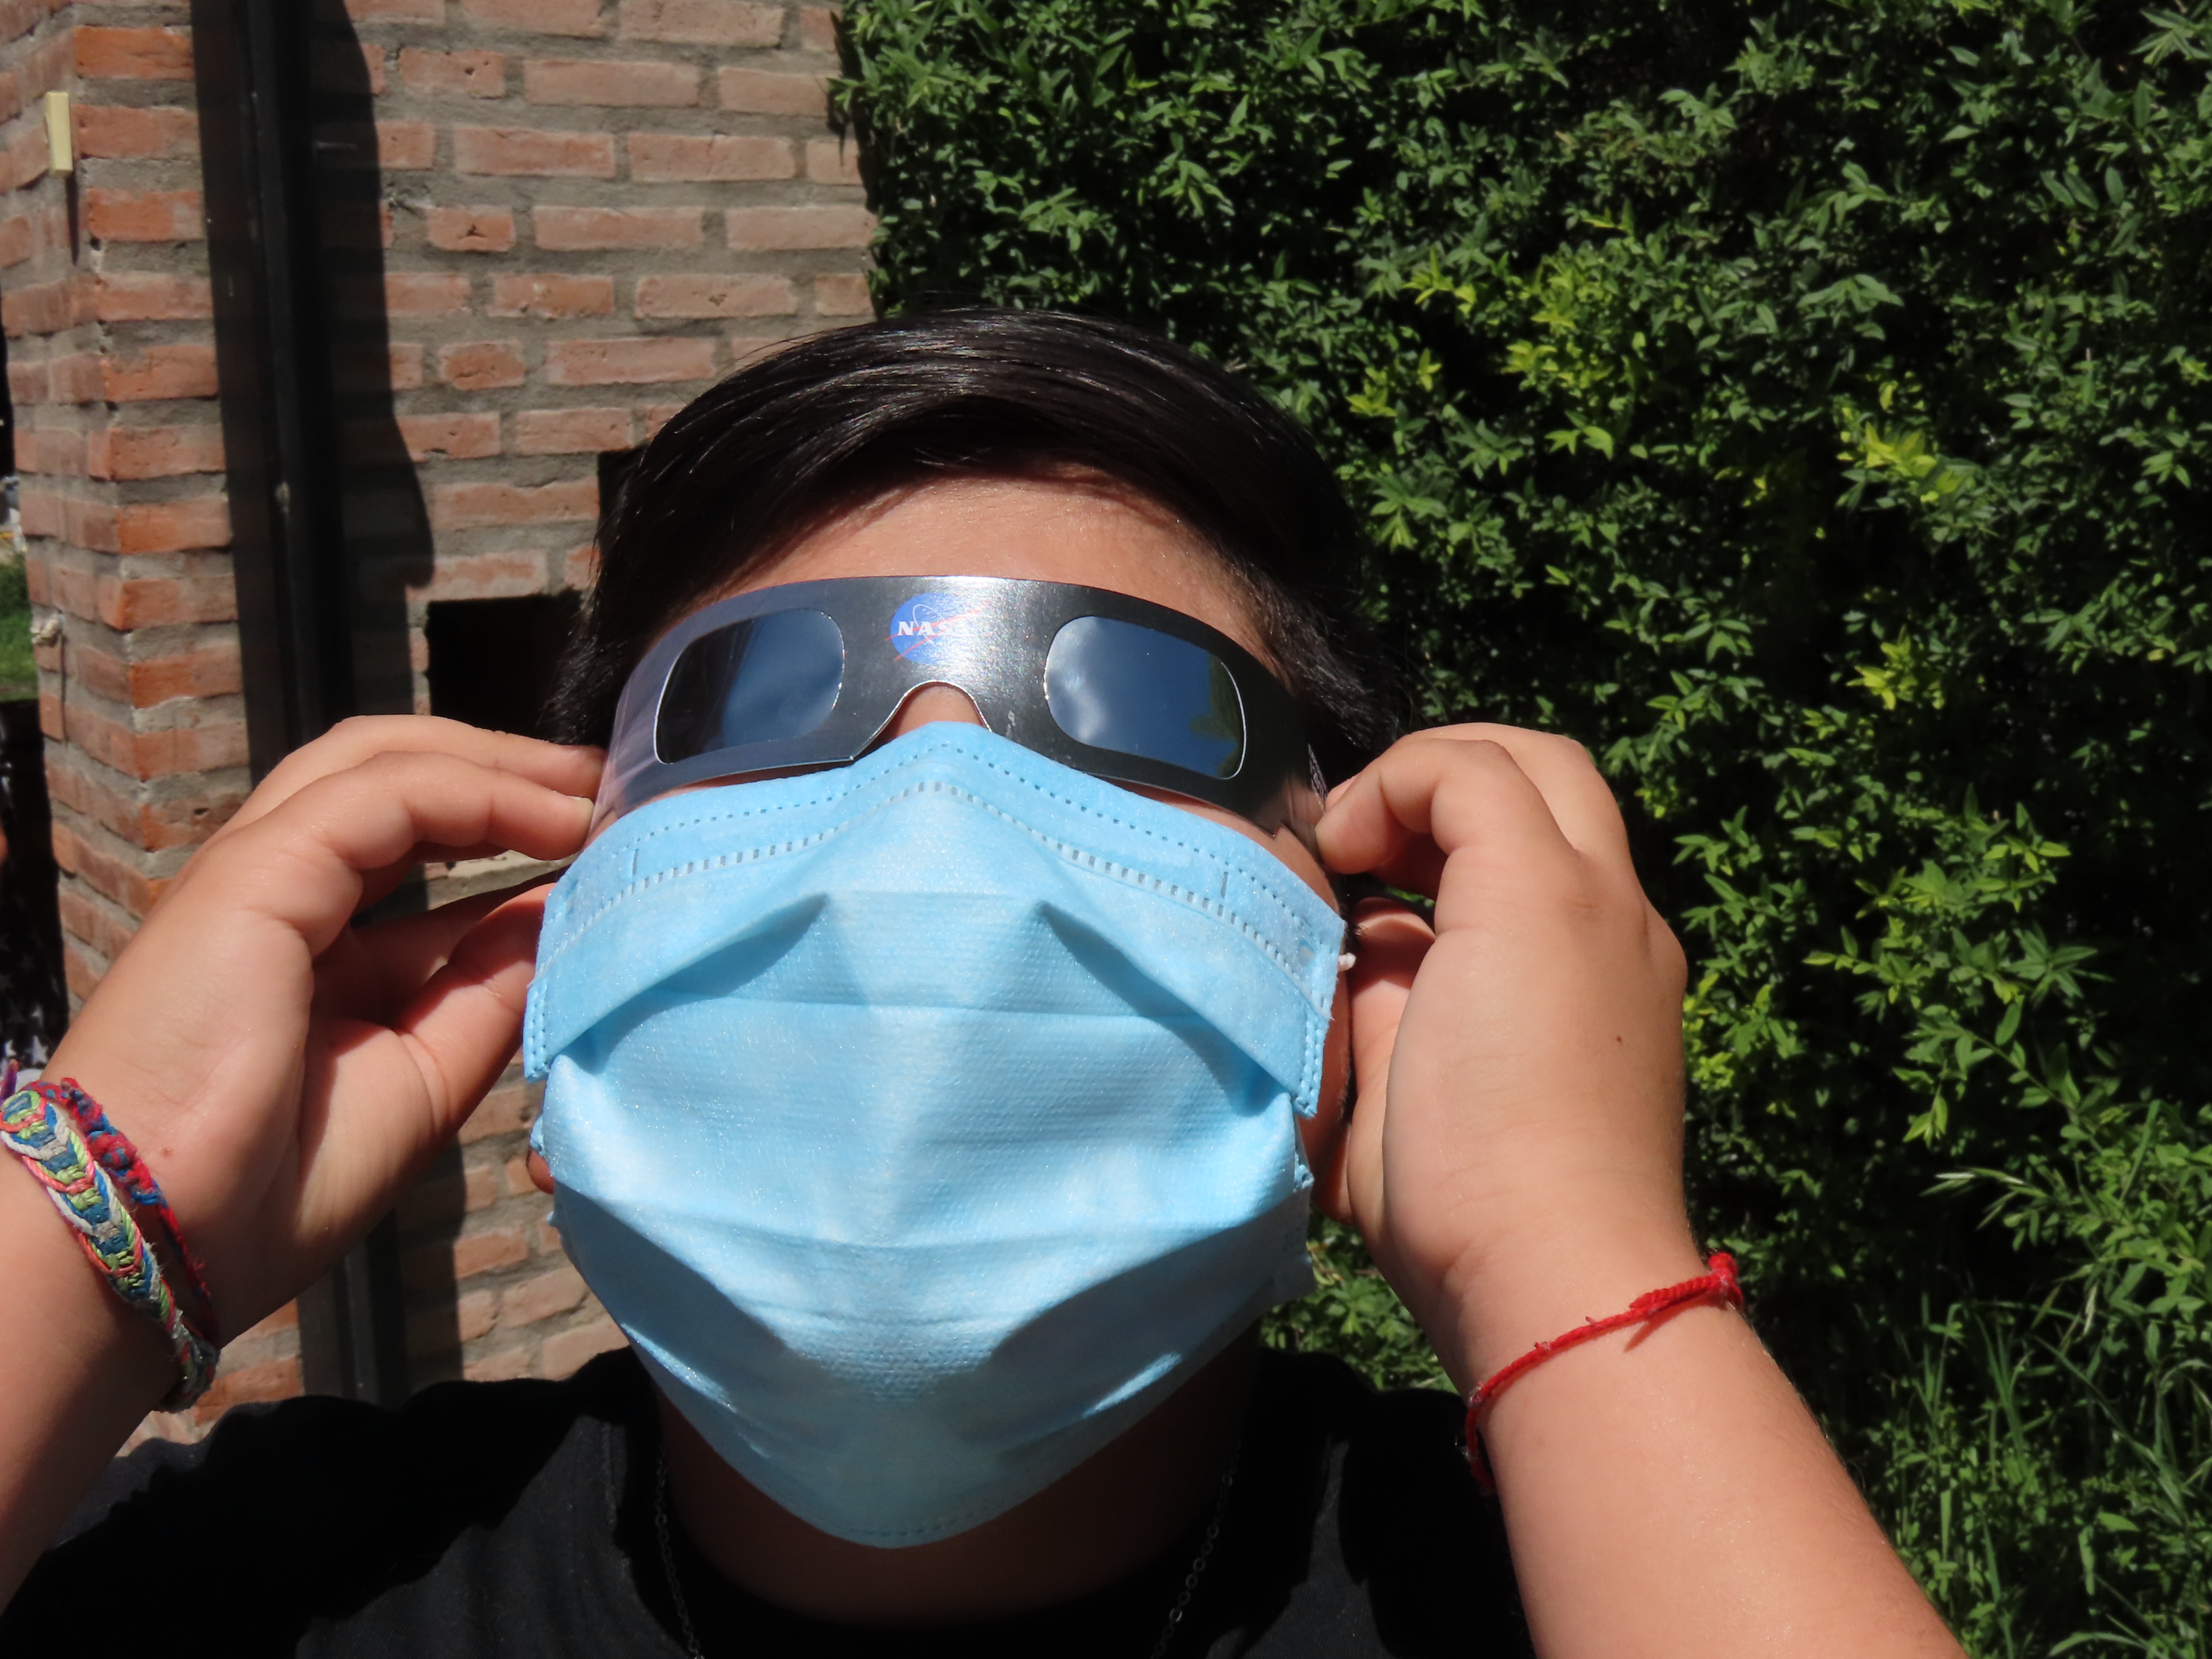 Person wearing solar viewing glasses and a face mask.